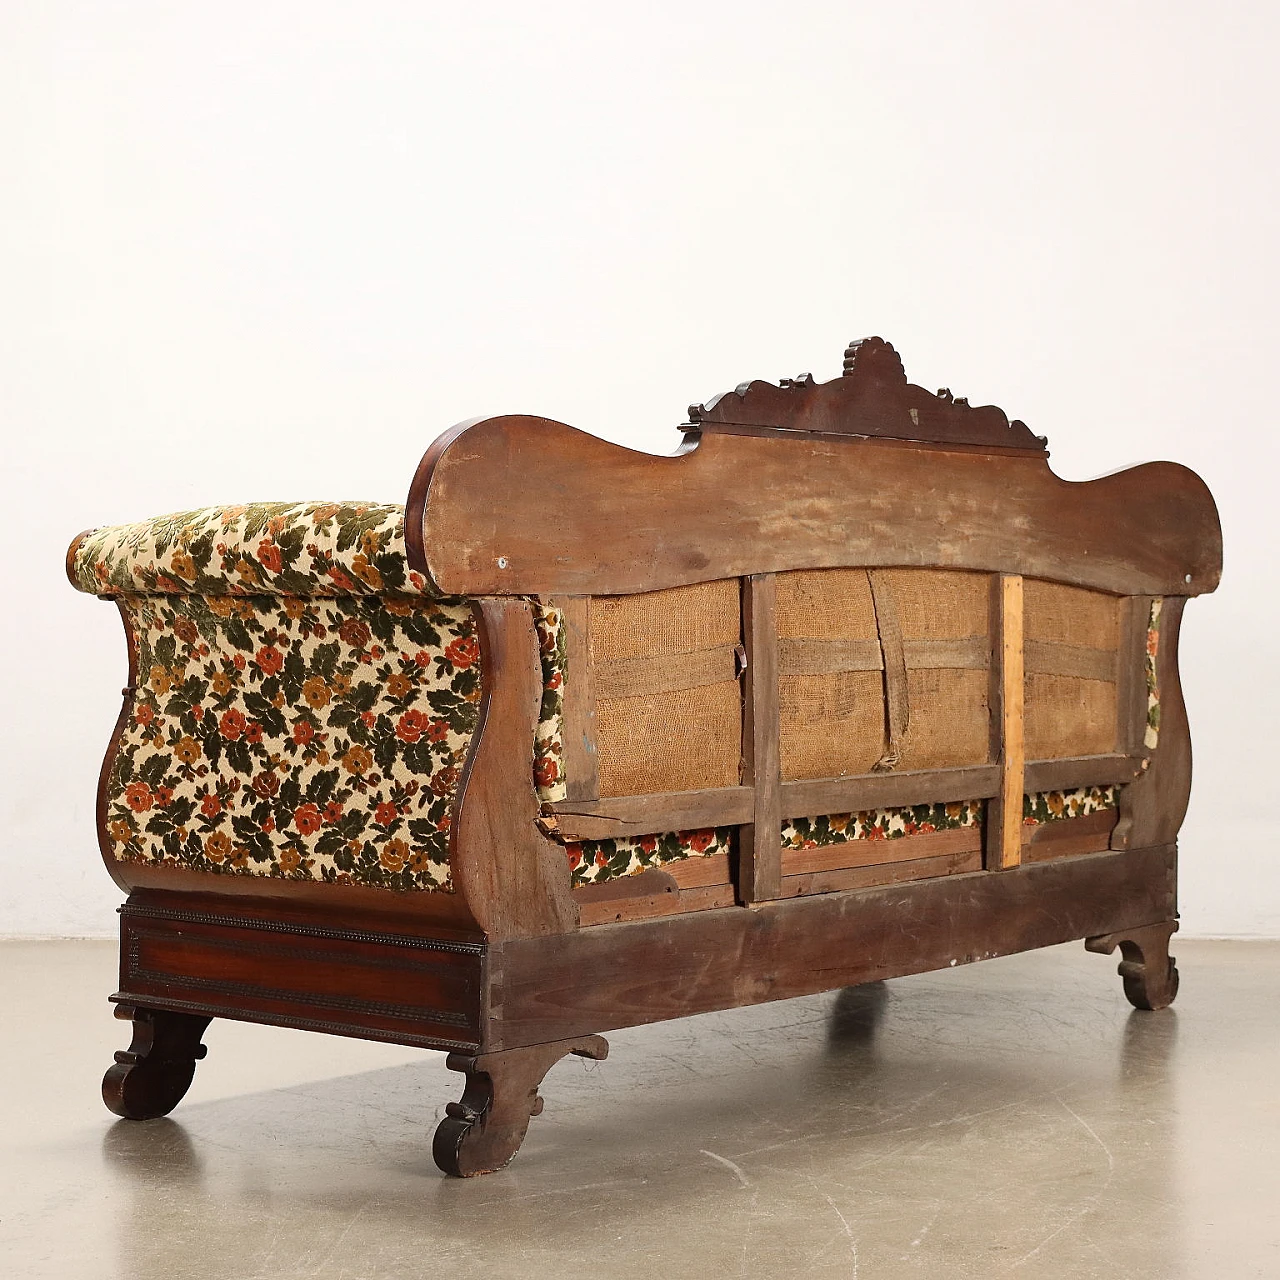 Mahogany sofa with carved leaf motifs and floral fabric, 19th century 9